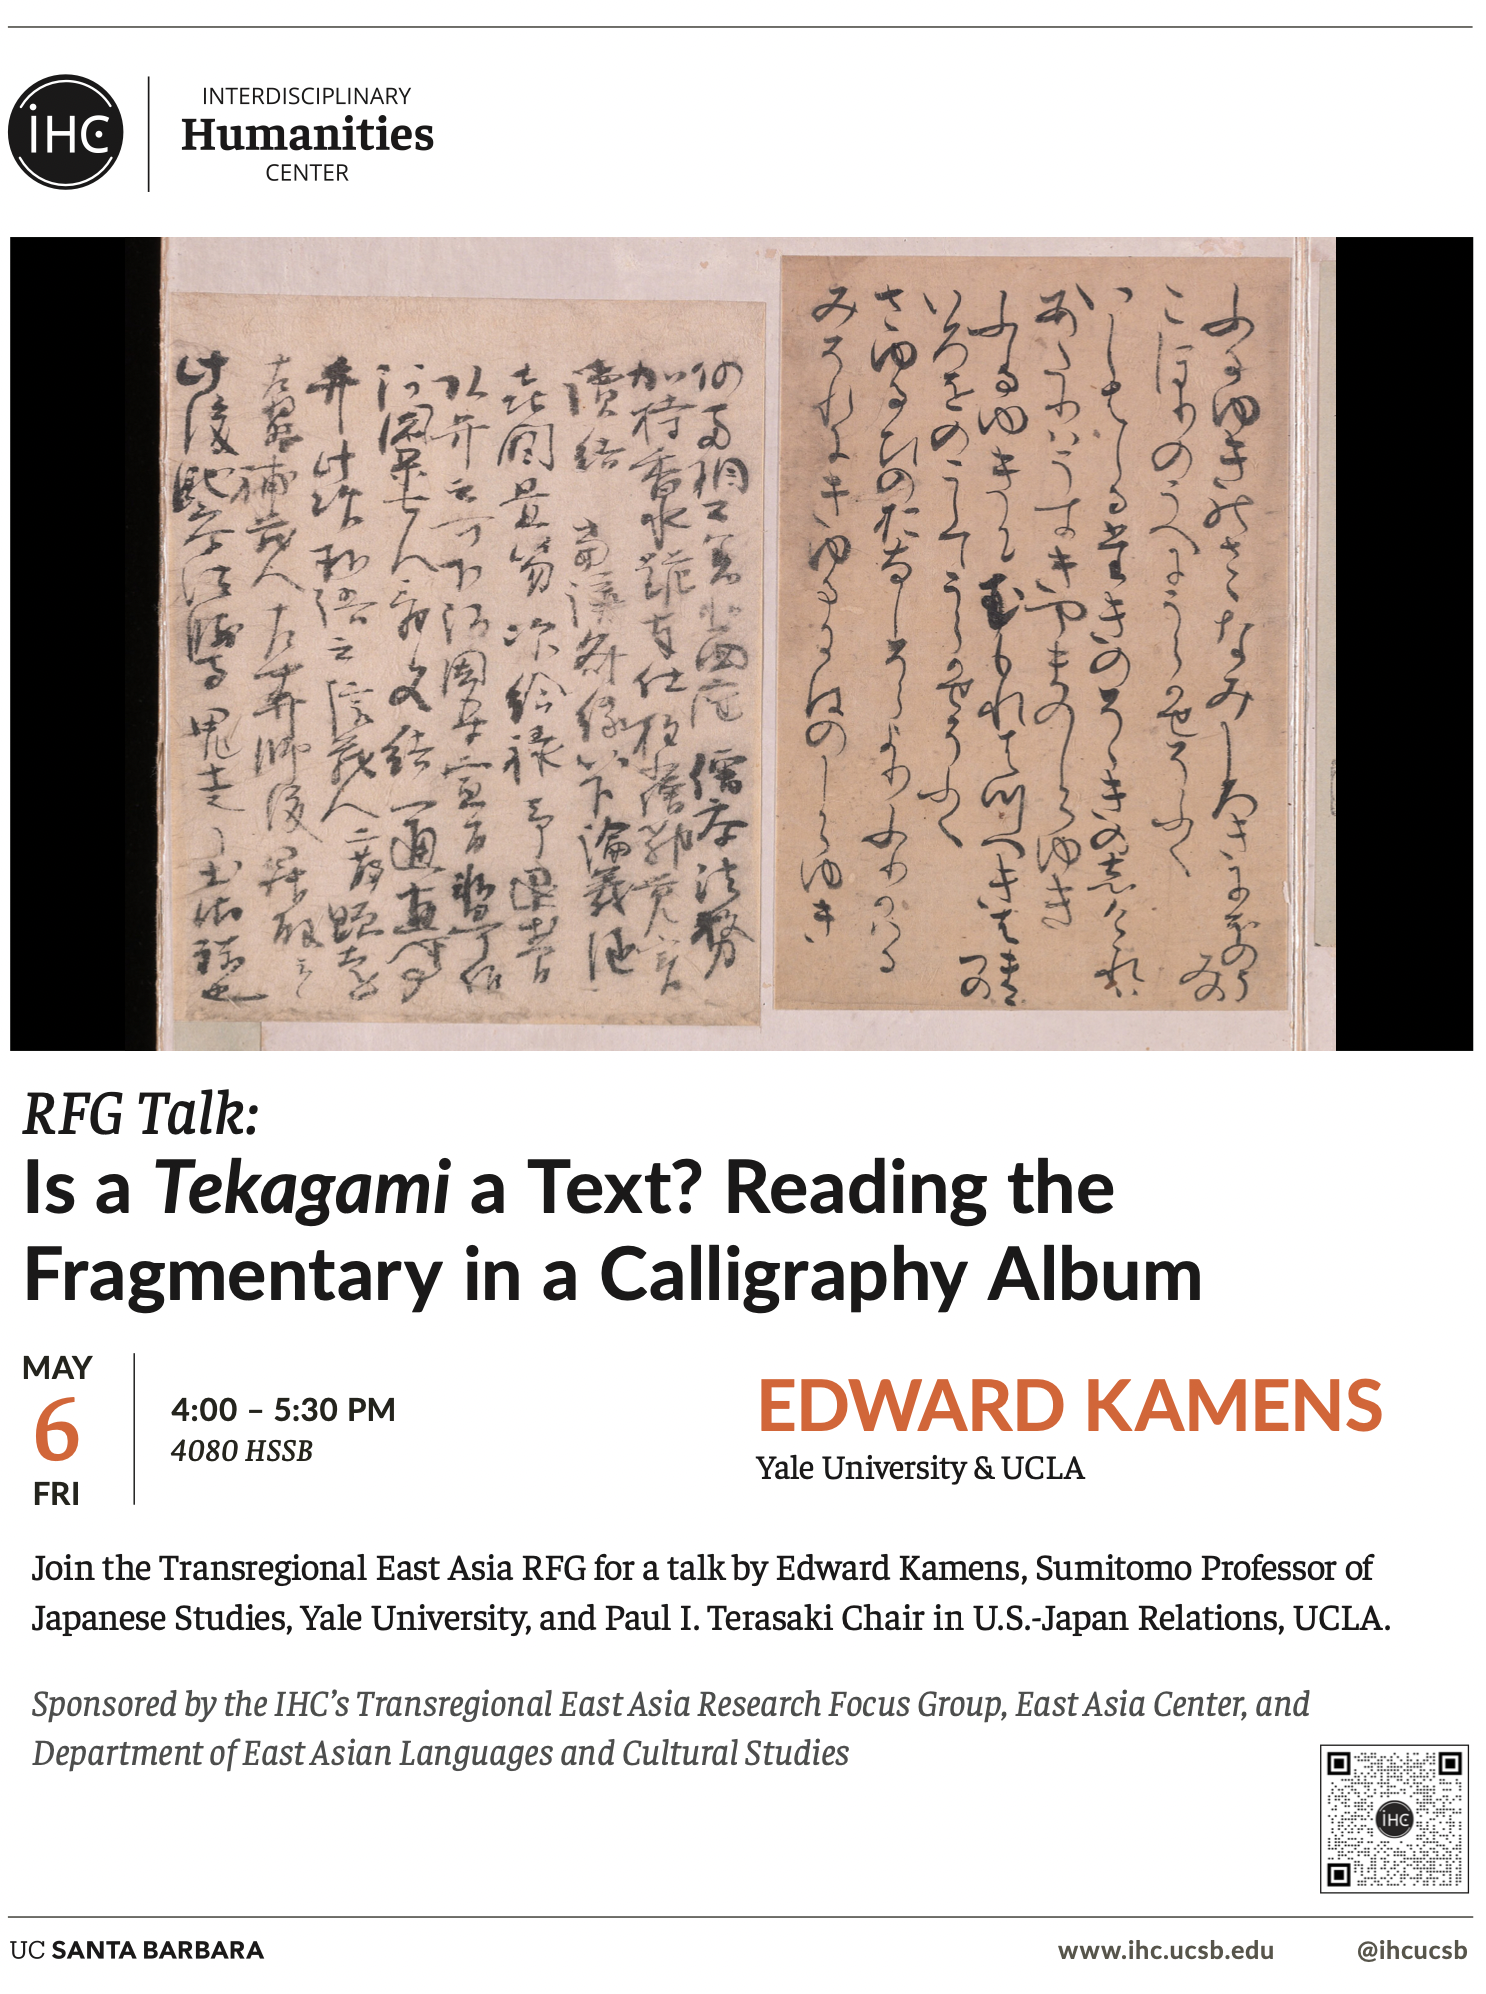 Flyer for "RFG Talk: Is a Tekagamu a Text? Reading the Fragmentary in a Calligraphy Album" on May 6, 2022 from 4-5:30PM at 4080 HSSB